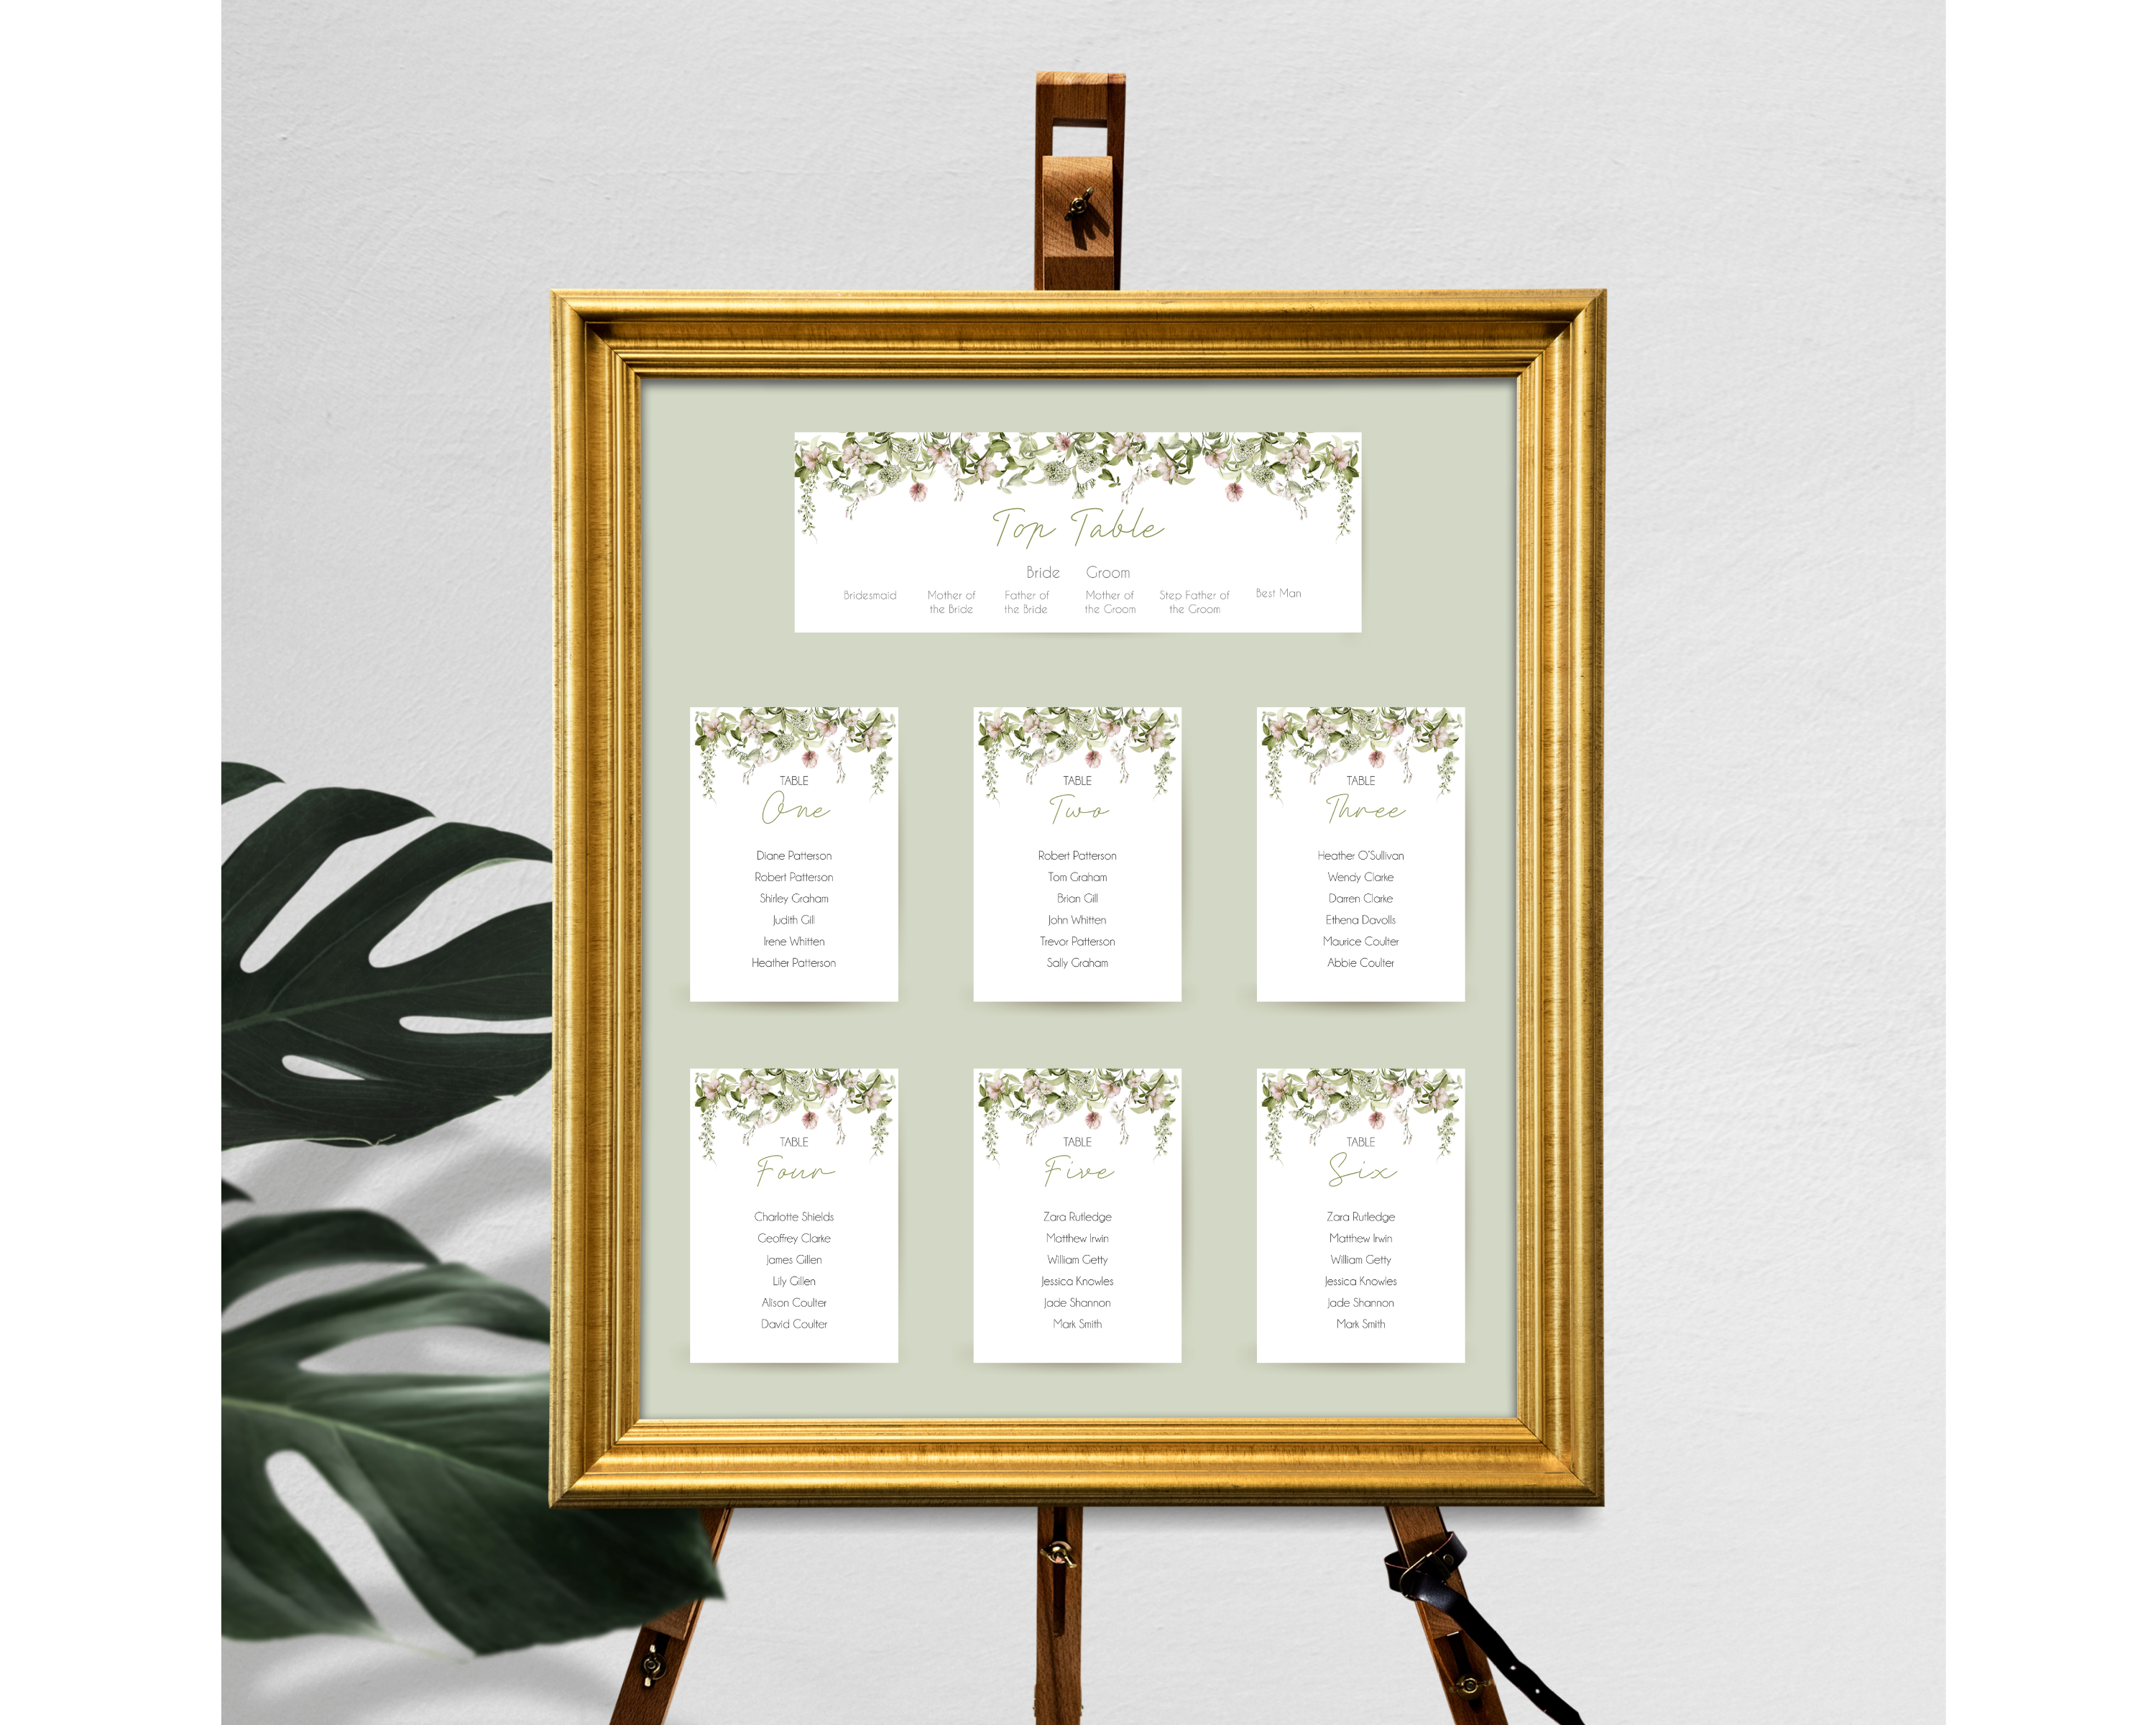 A set of Poppleberry blush & green floral wedding table plan cards, including 'top table' and 'A6 table' cards, framed.